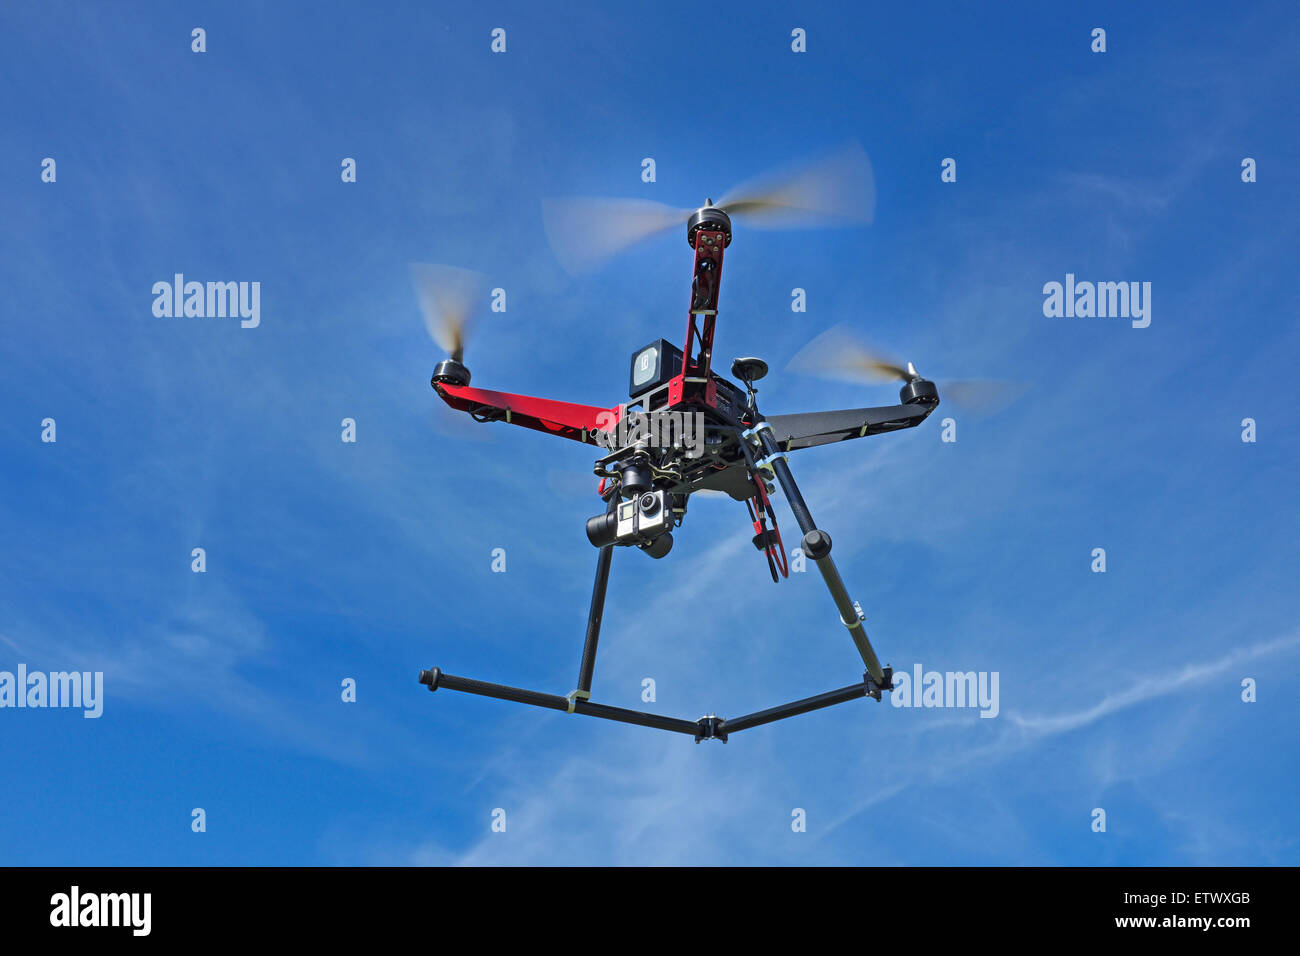 A quadcopter drone, equipped with a gopro camera, in flight. Stock Photo